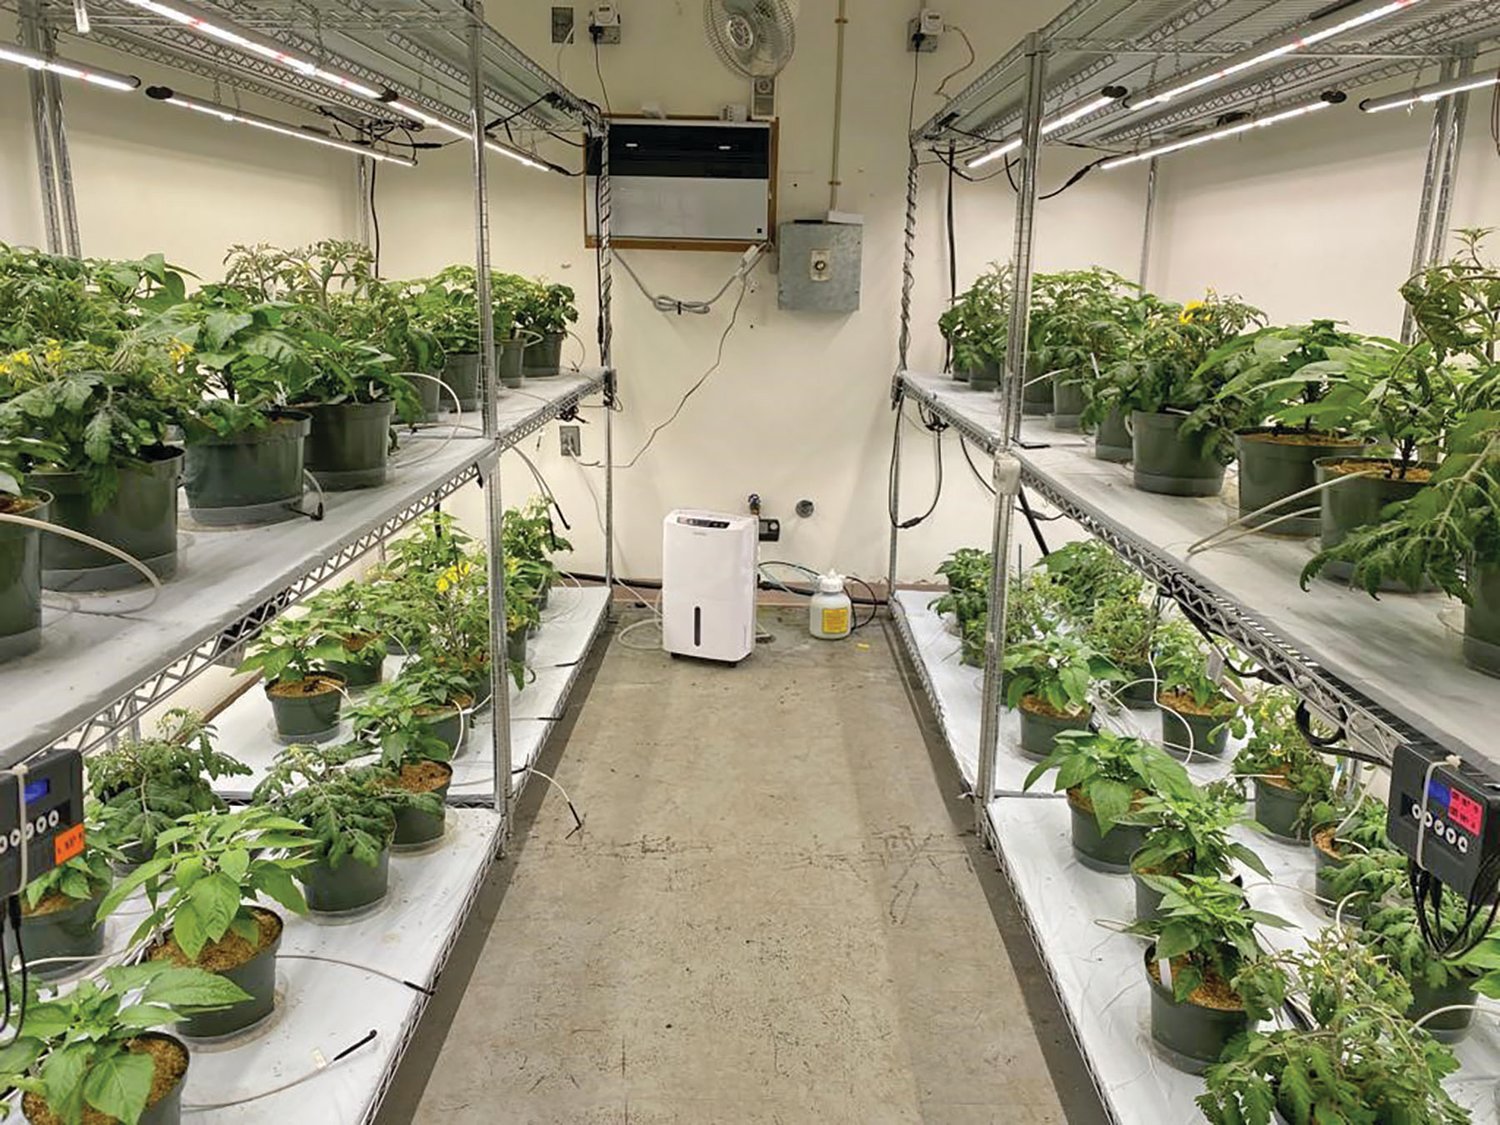 Mimicking indoor conditions, Celina Gómez, a UF/IFAS assistant professor of environmental horticulture, successfully grew several compact tomato cultivars. That’s a win for those who like to grow fruits and vegetables in their homes.